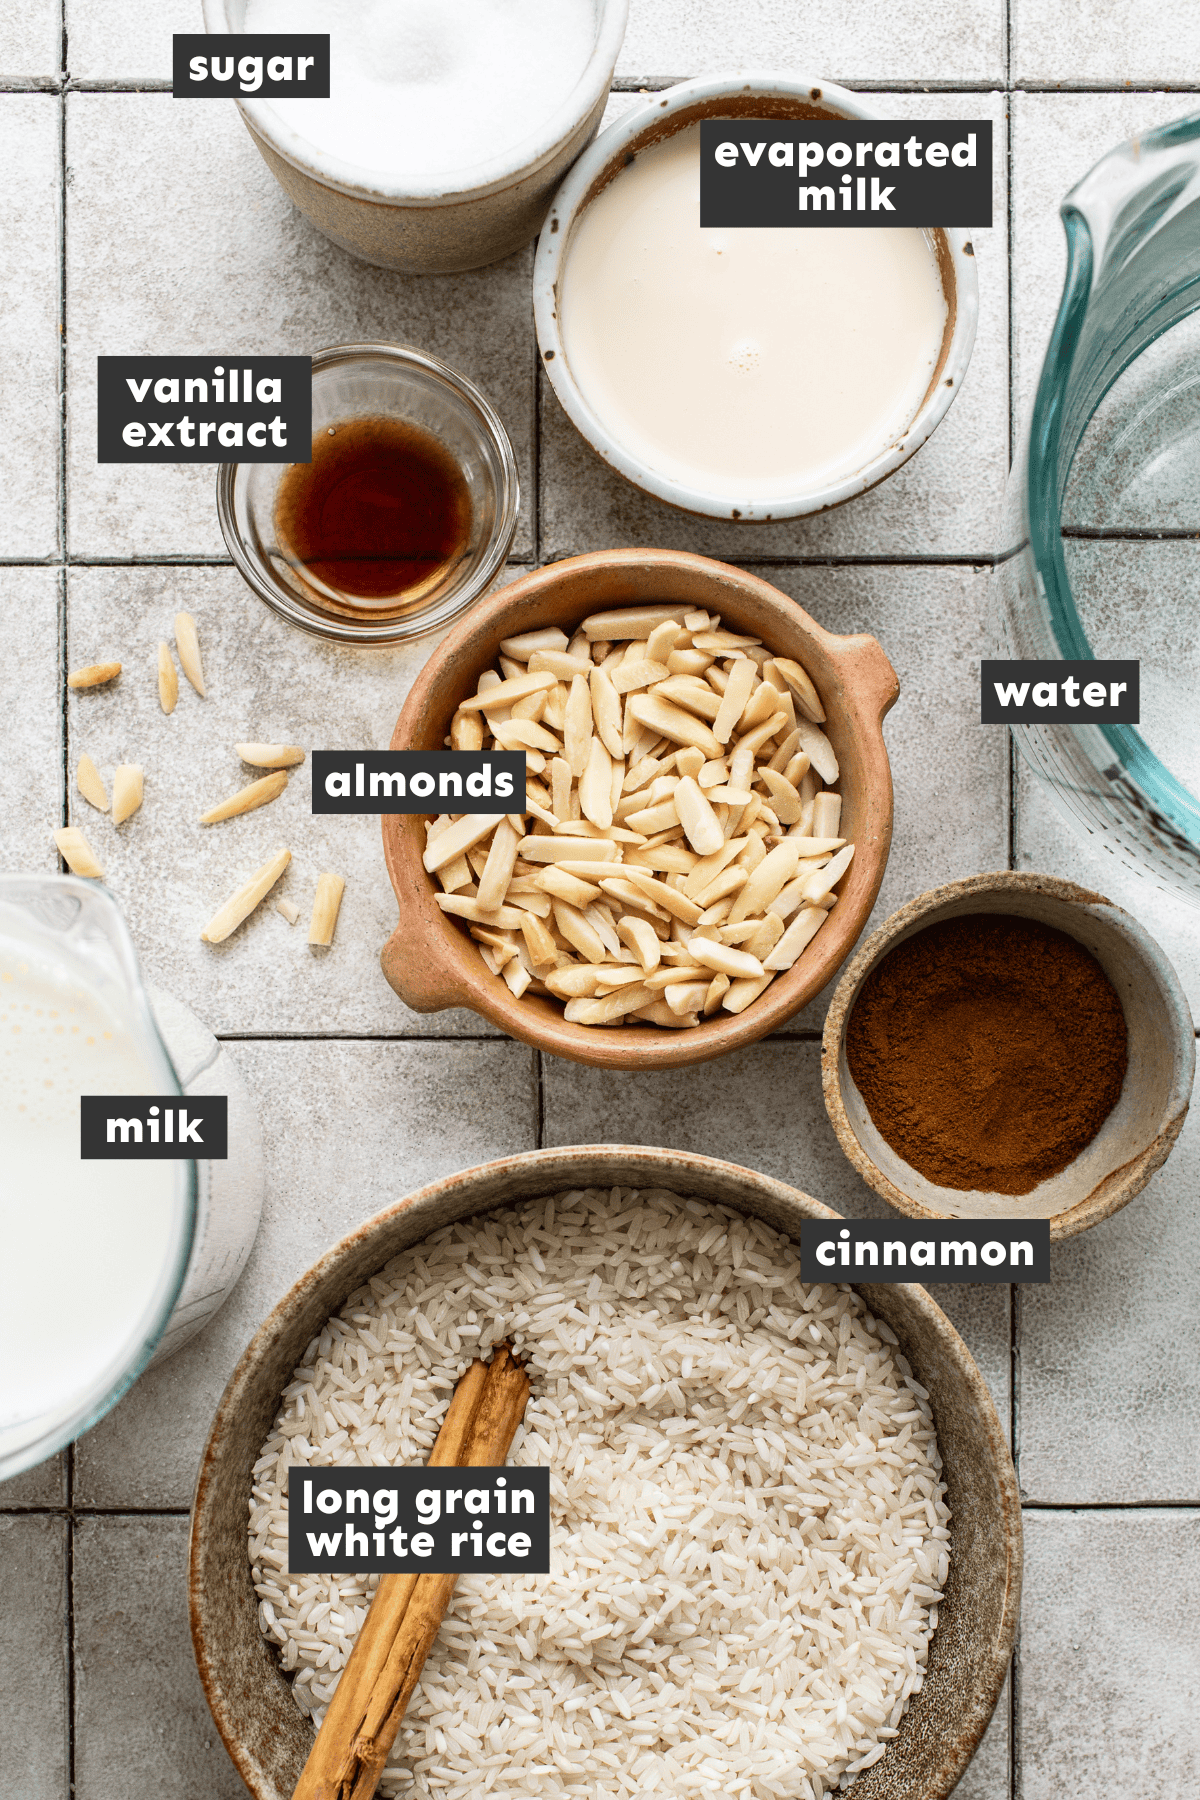 Horchata recipe ingredients measured and separated into mixing bowls